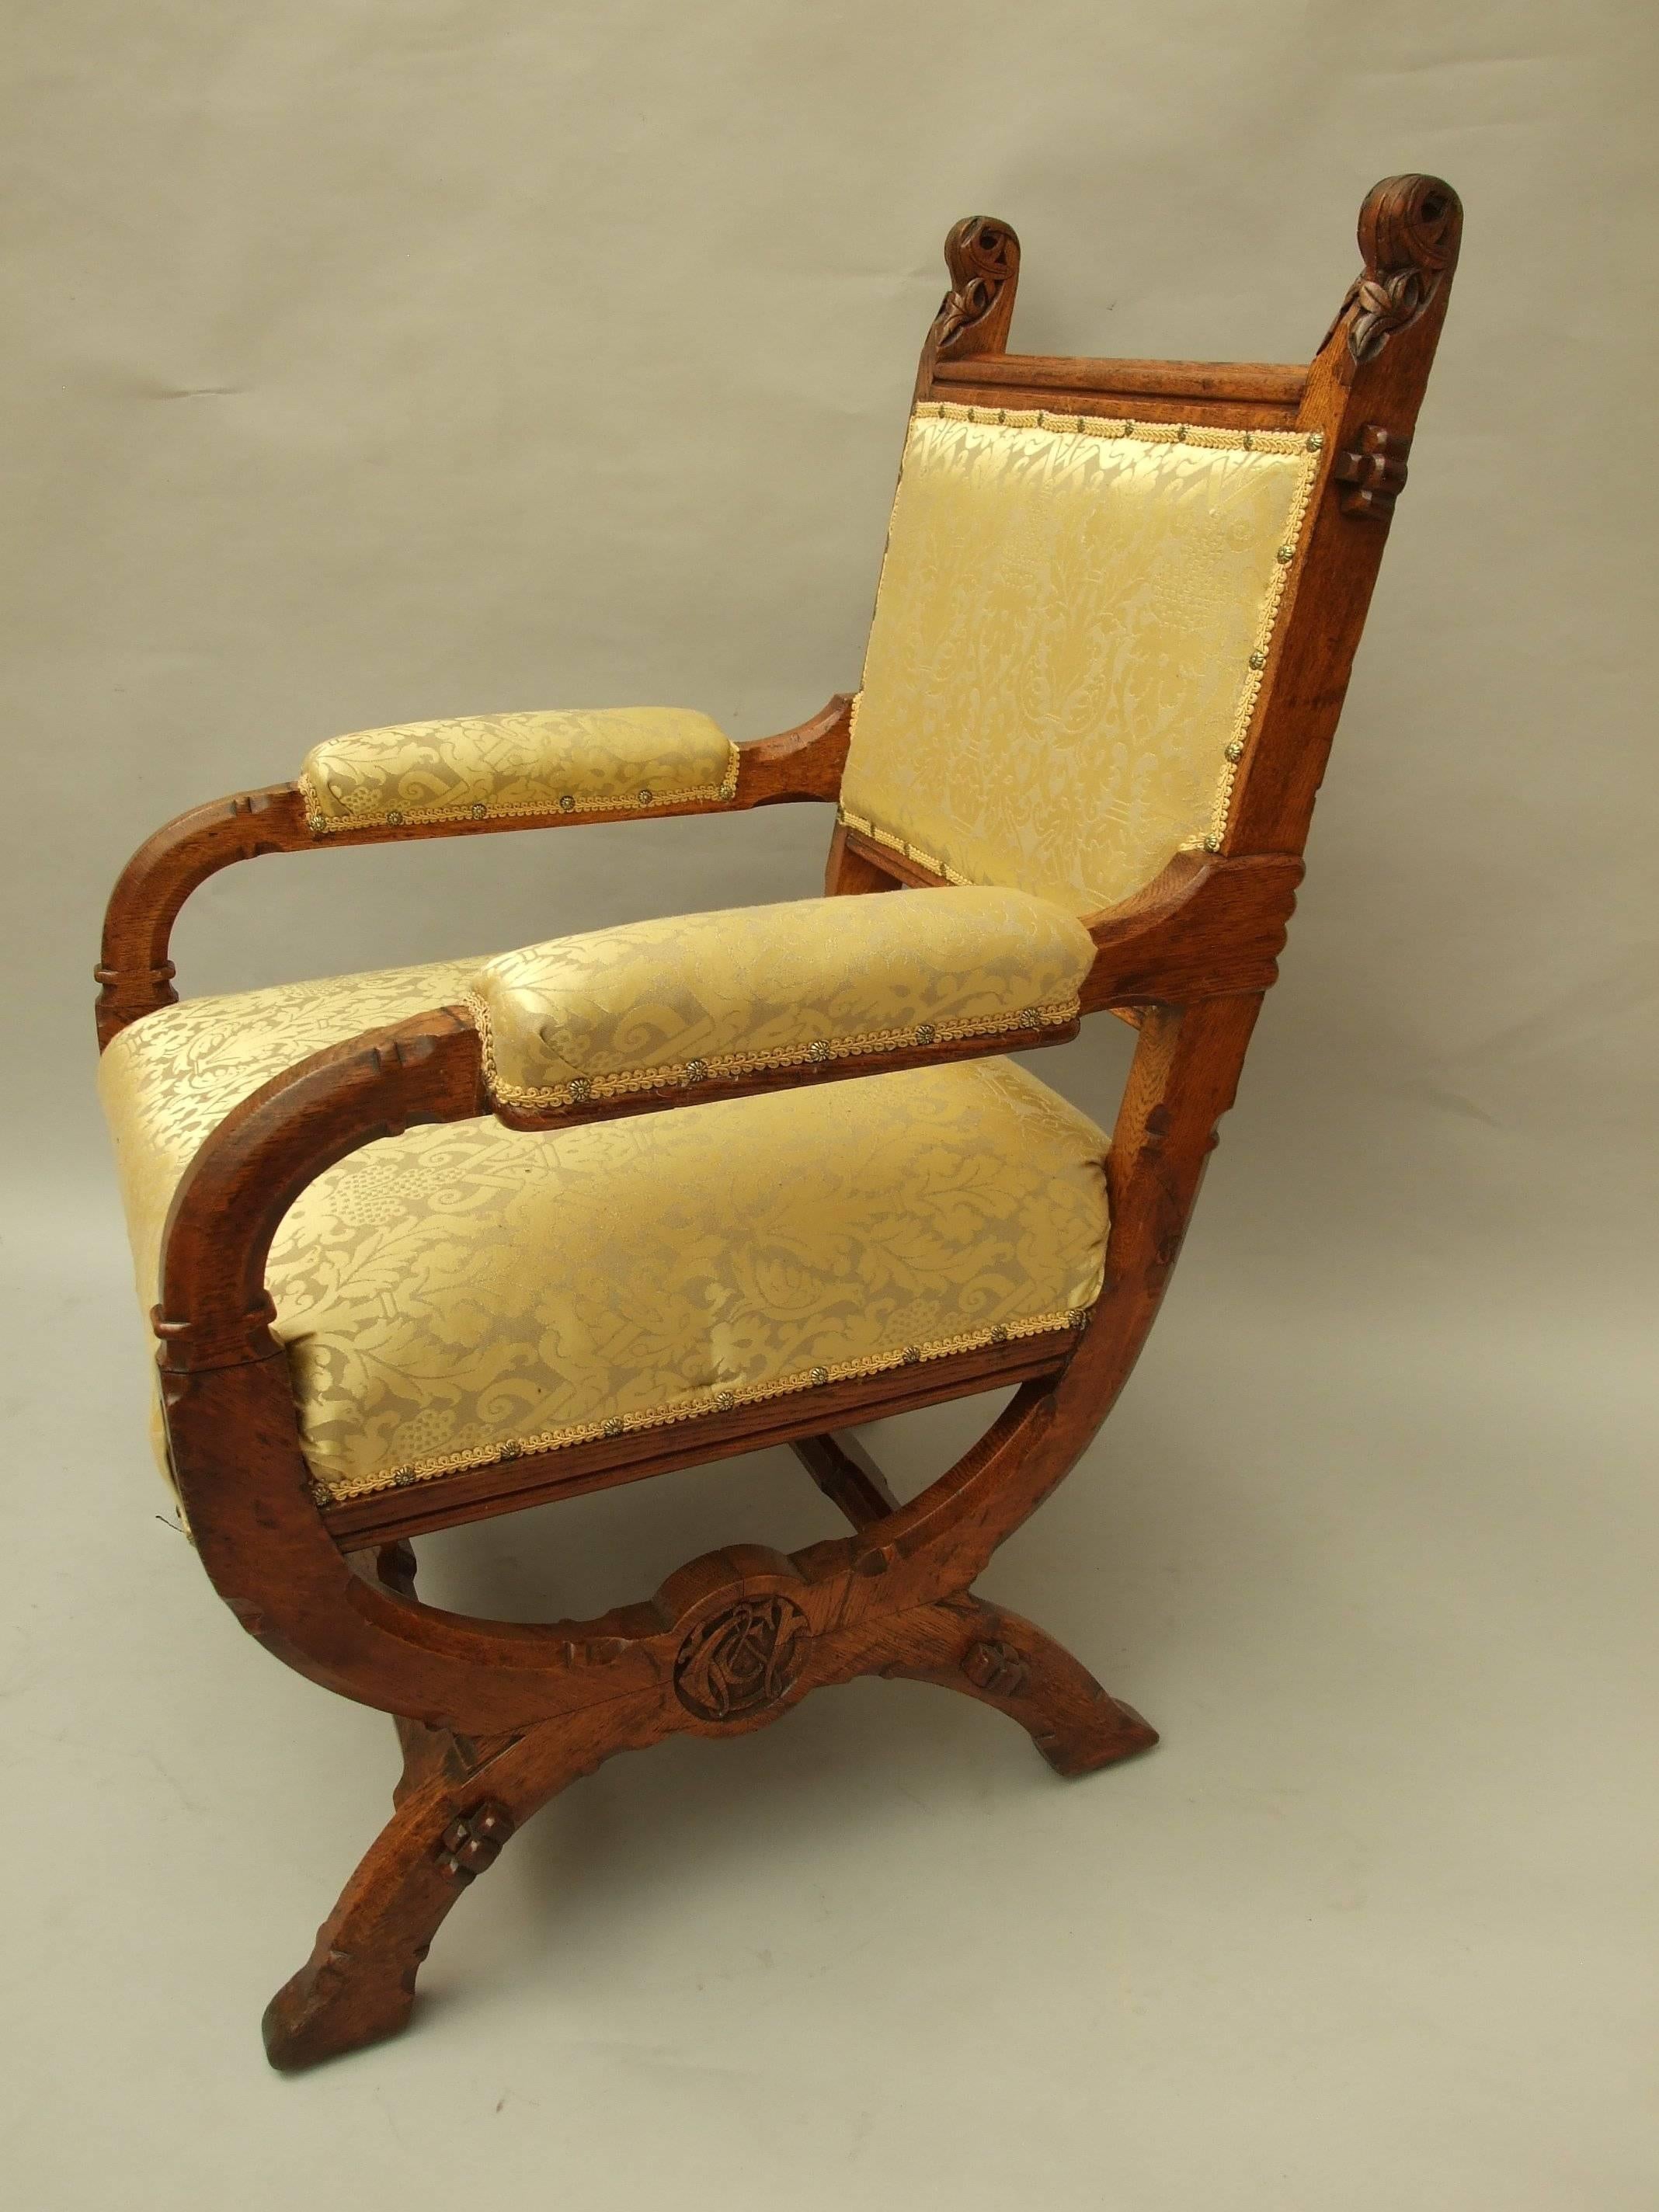 A W N Pugin: An important, oak Gothic reform armchair, chamfered all round, with tusked tenons construction, carved floret finials to the back, carved initials with roundels to the side cross-stretchers and inset brass castors, designed by A W N